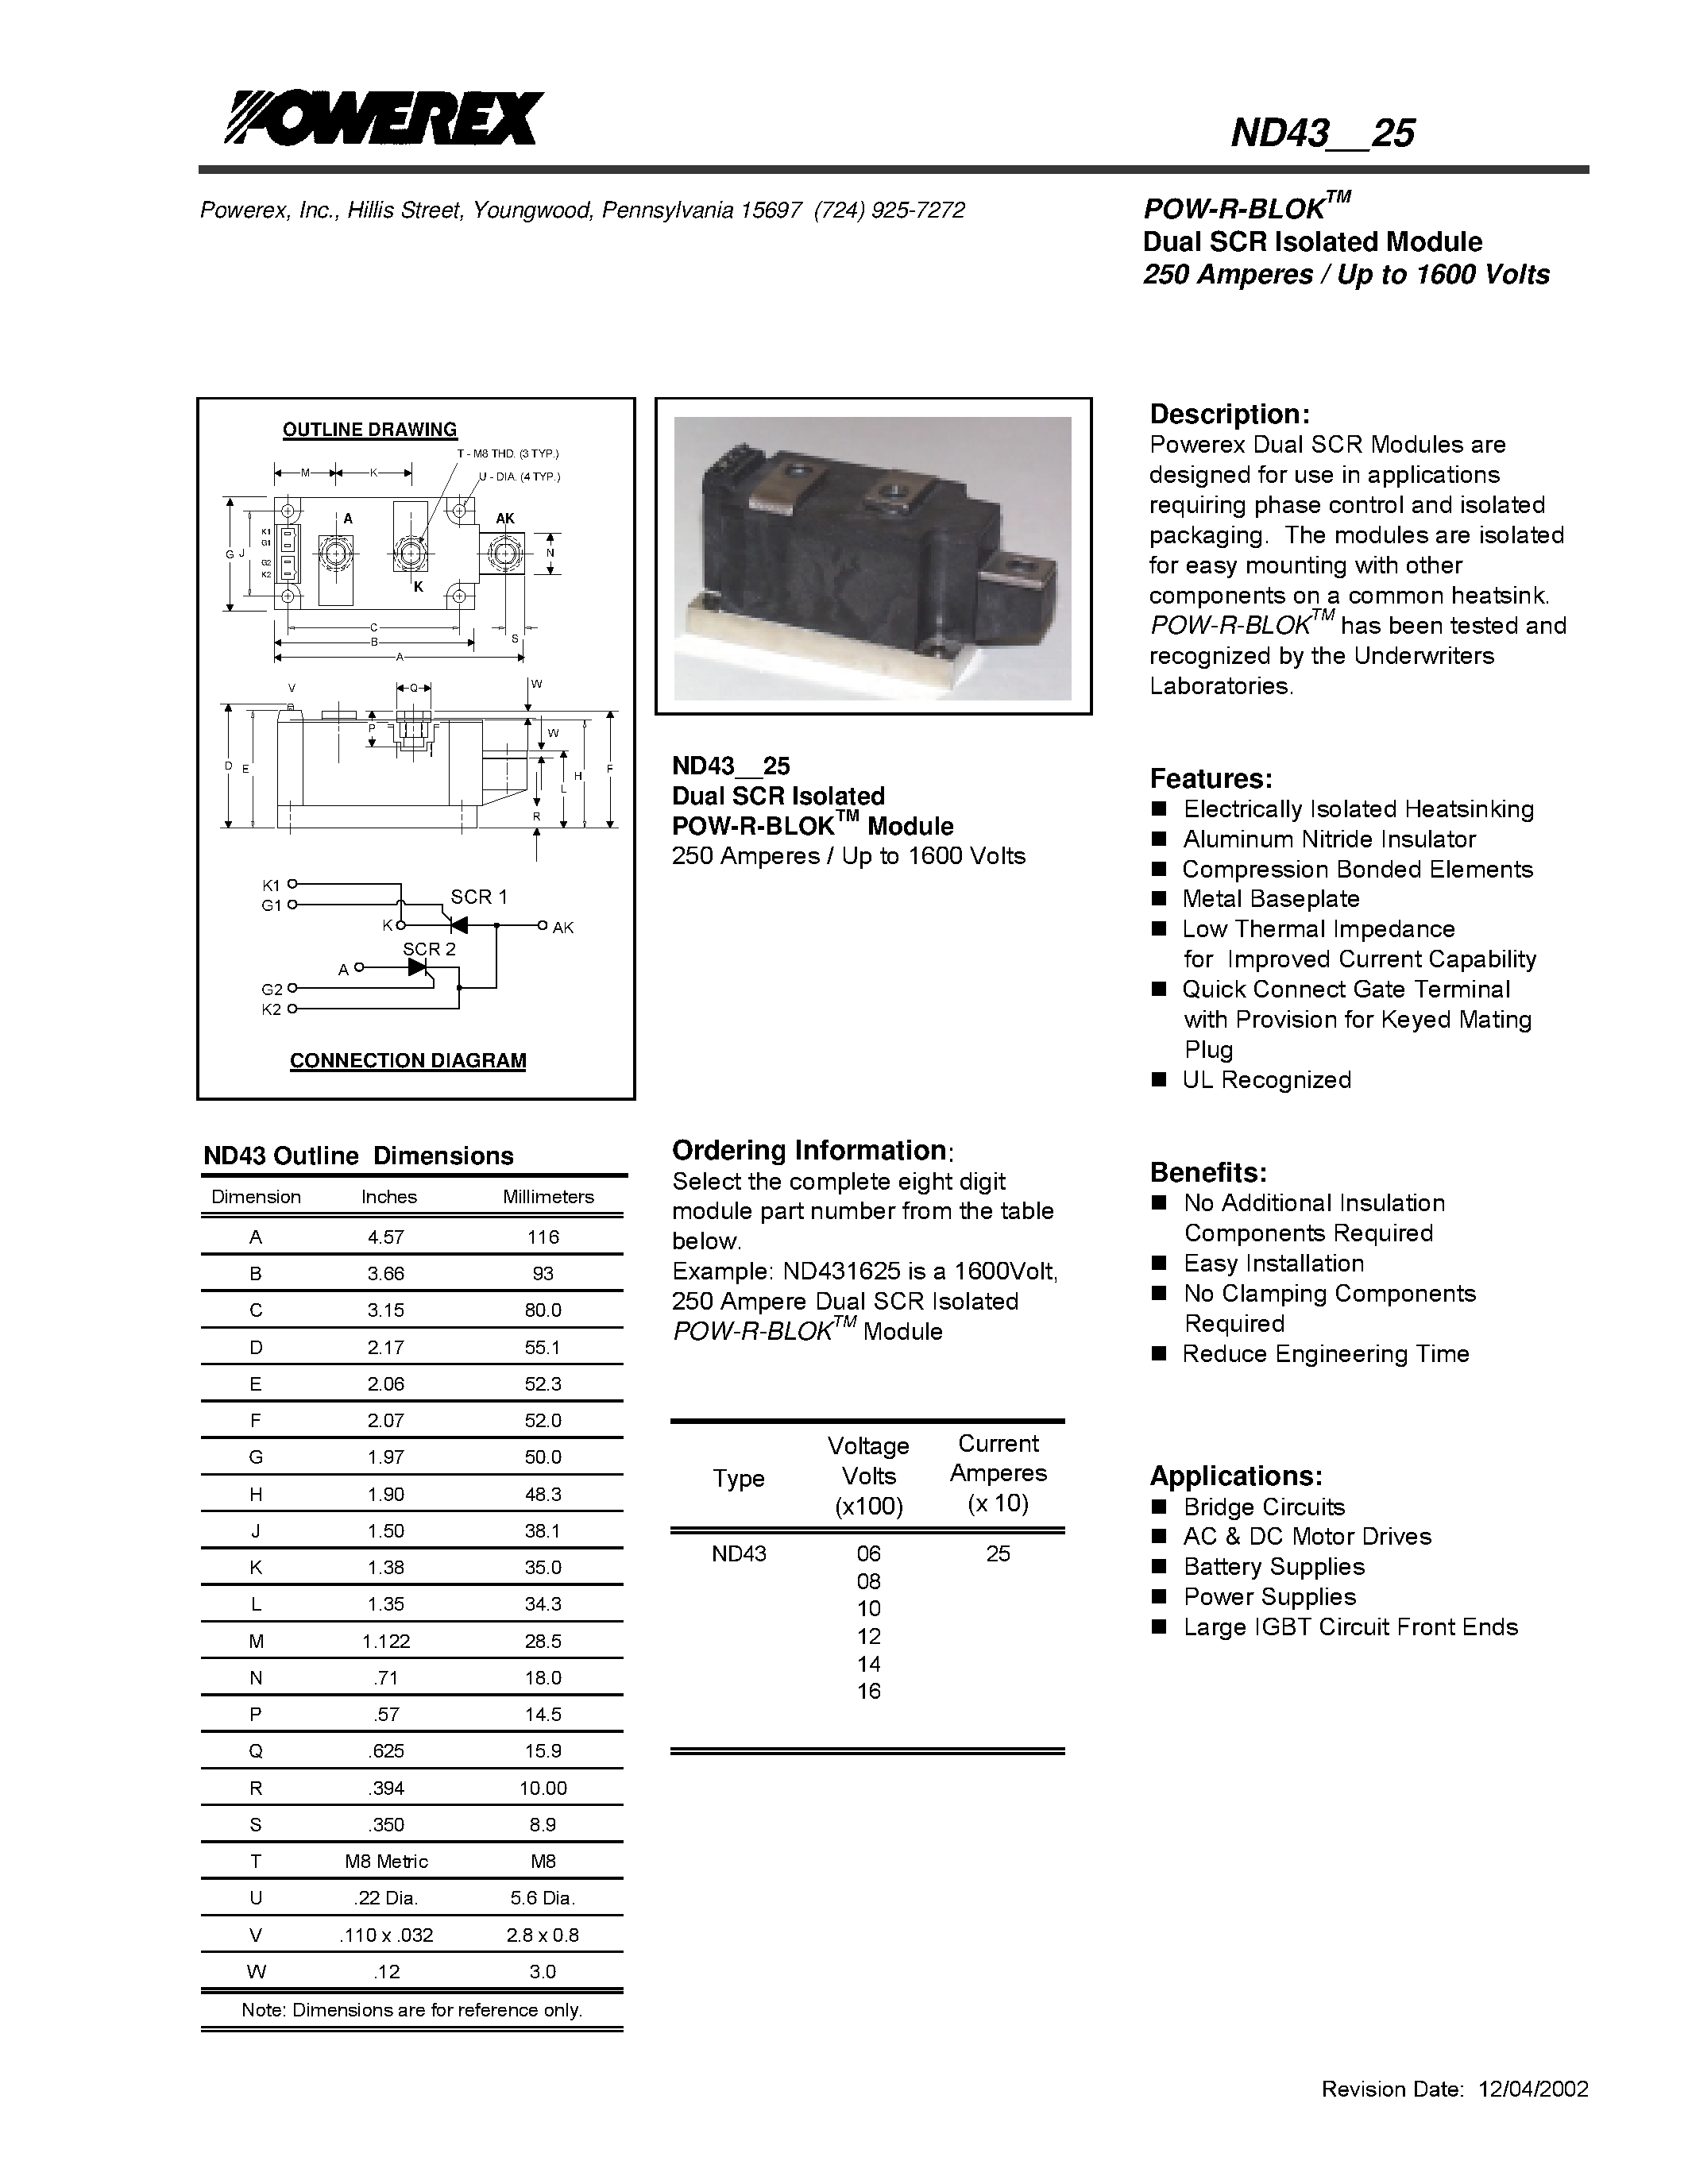 Datasheet ND431225 - POW-R-BLOK Dual SCR Isolated Module (250 Amperes / Up to 1600 Volts) page 1